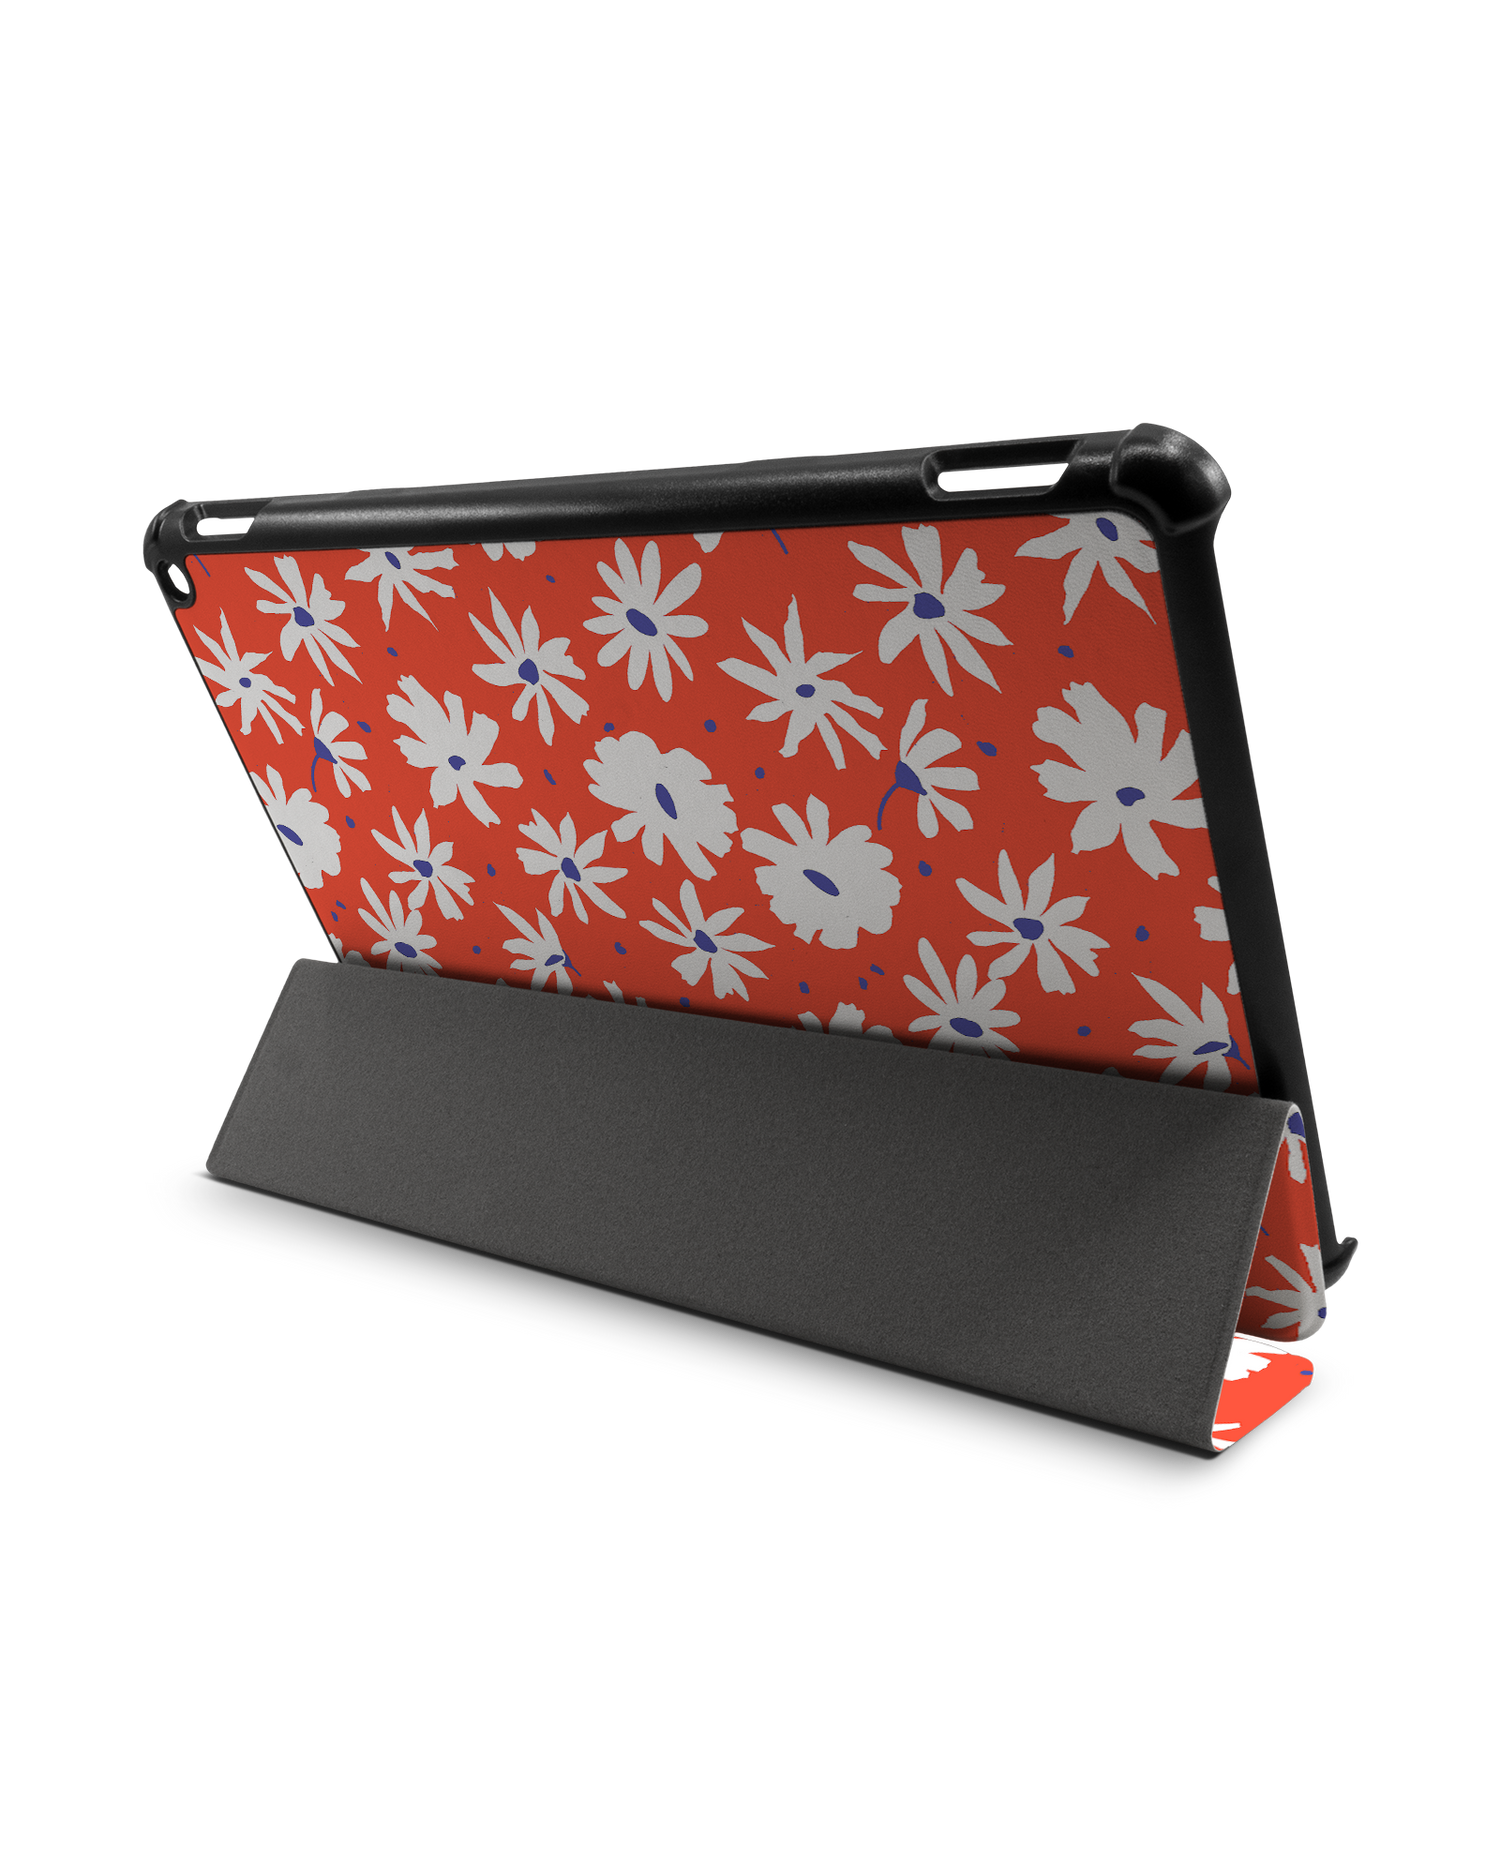 Retro Daisy Tablet Smart Case for Amazon Fire HD 10 (2021): Used as Stand